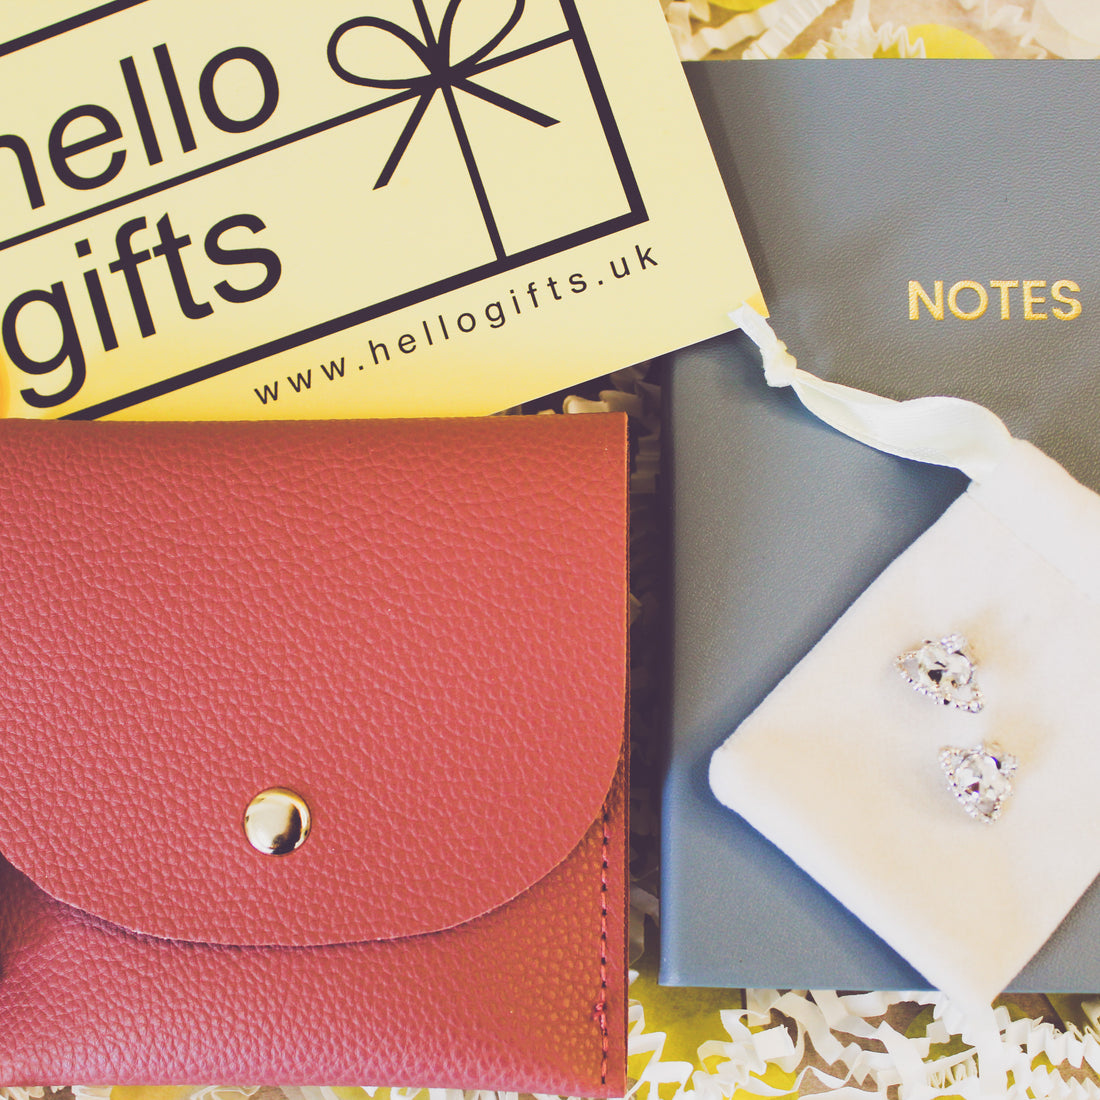 For Her – Hello Gifts UK